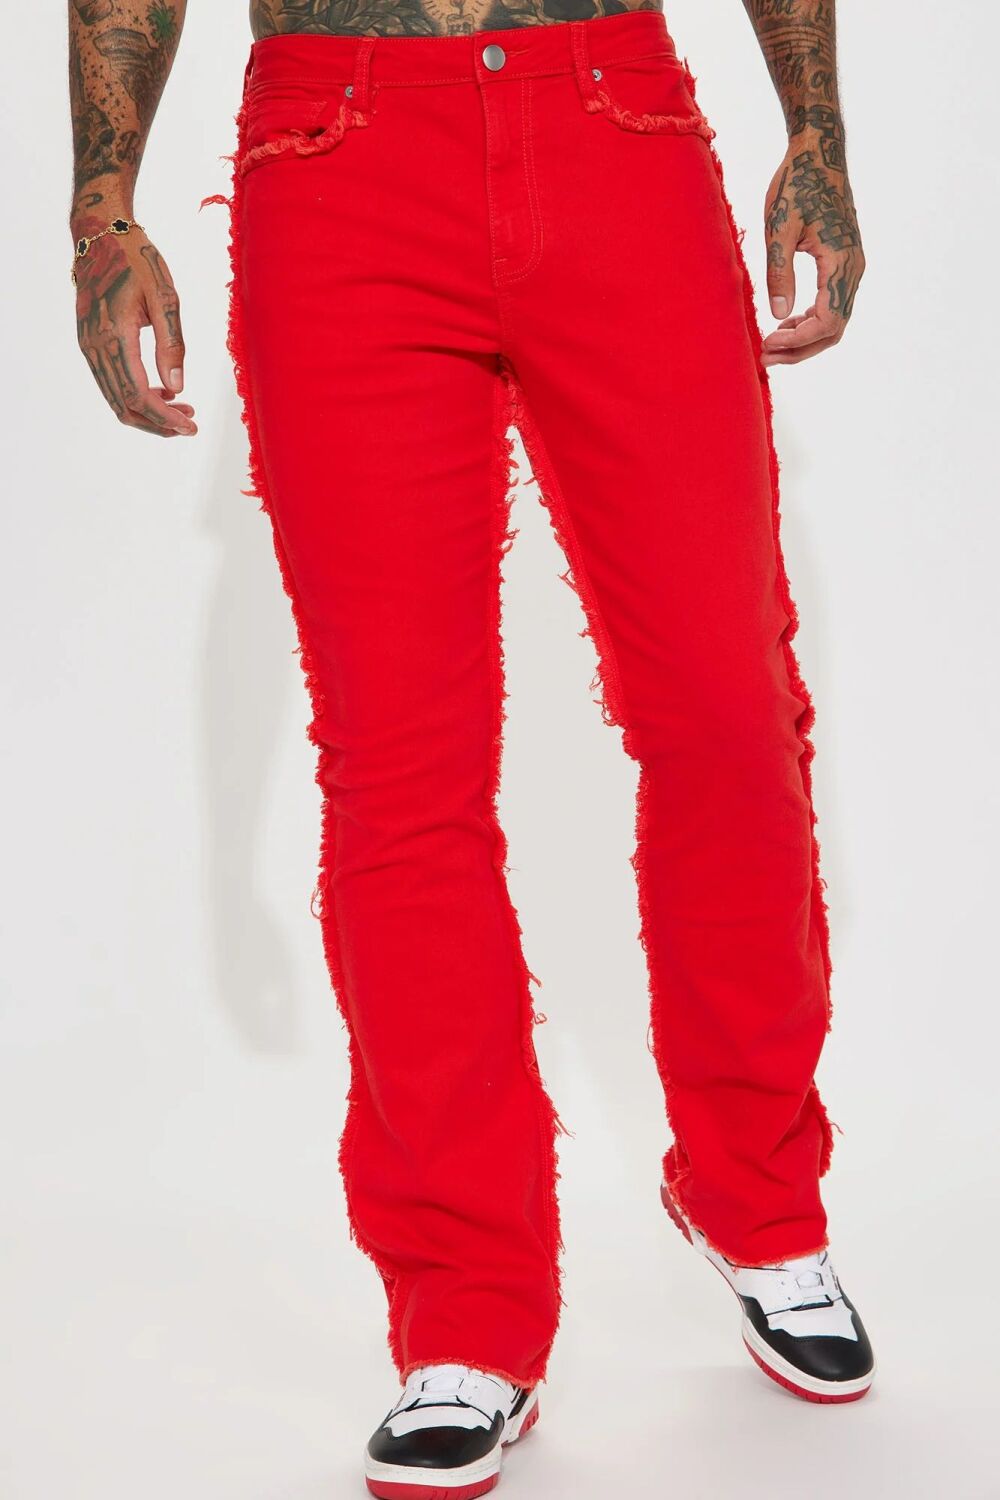 Size: 36 Red Skinny Flare Fit Jeans SKU: 475869